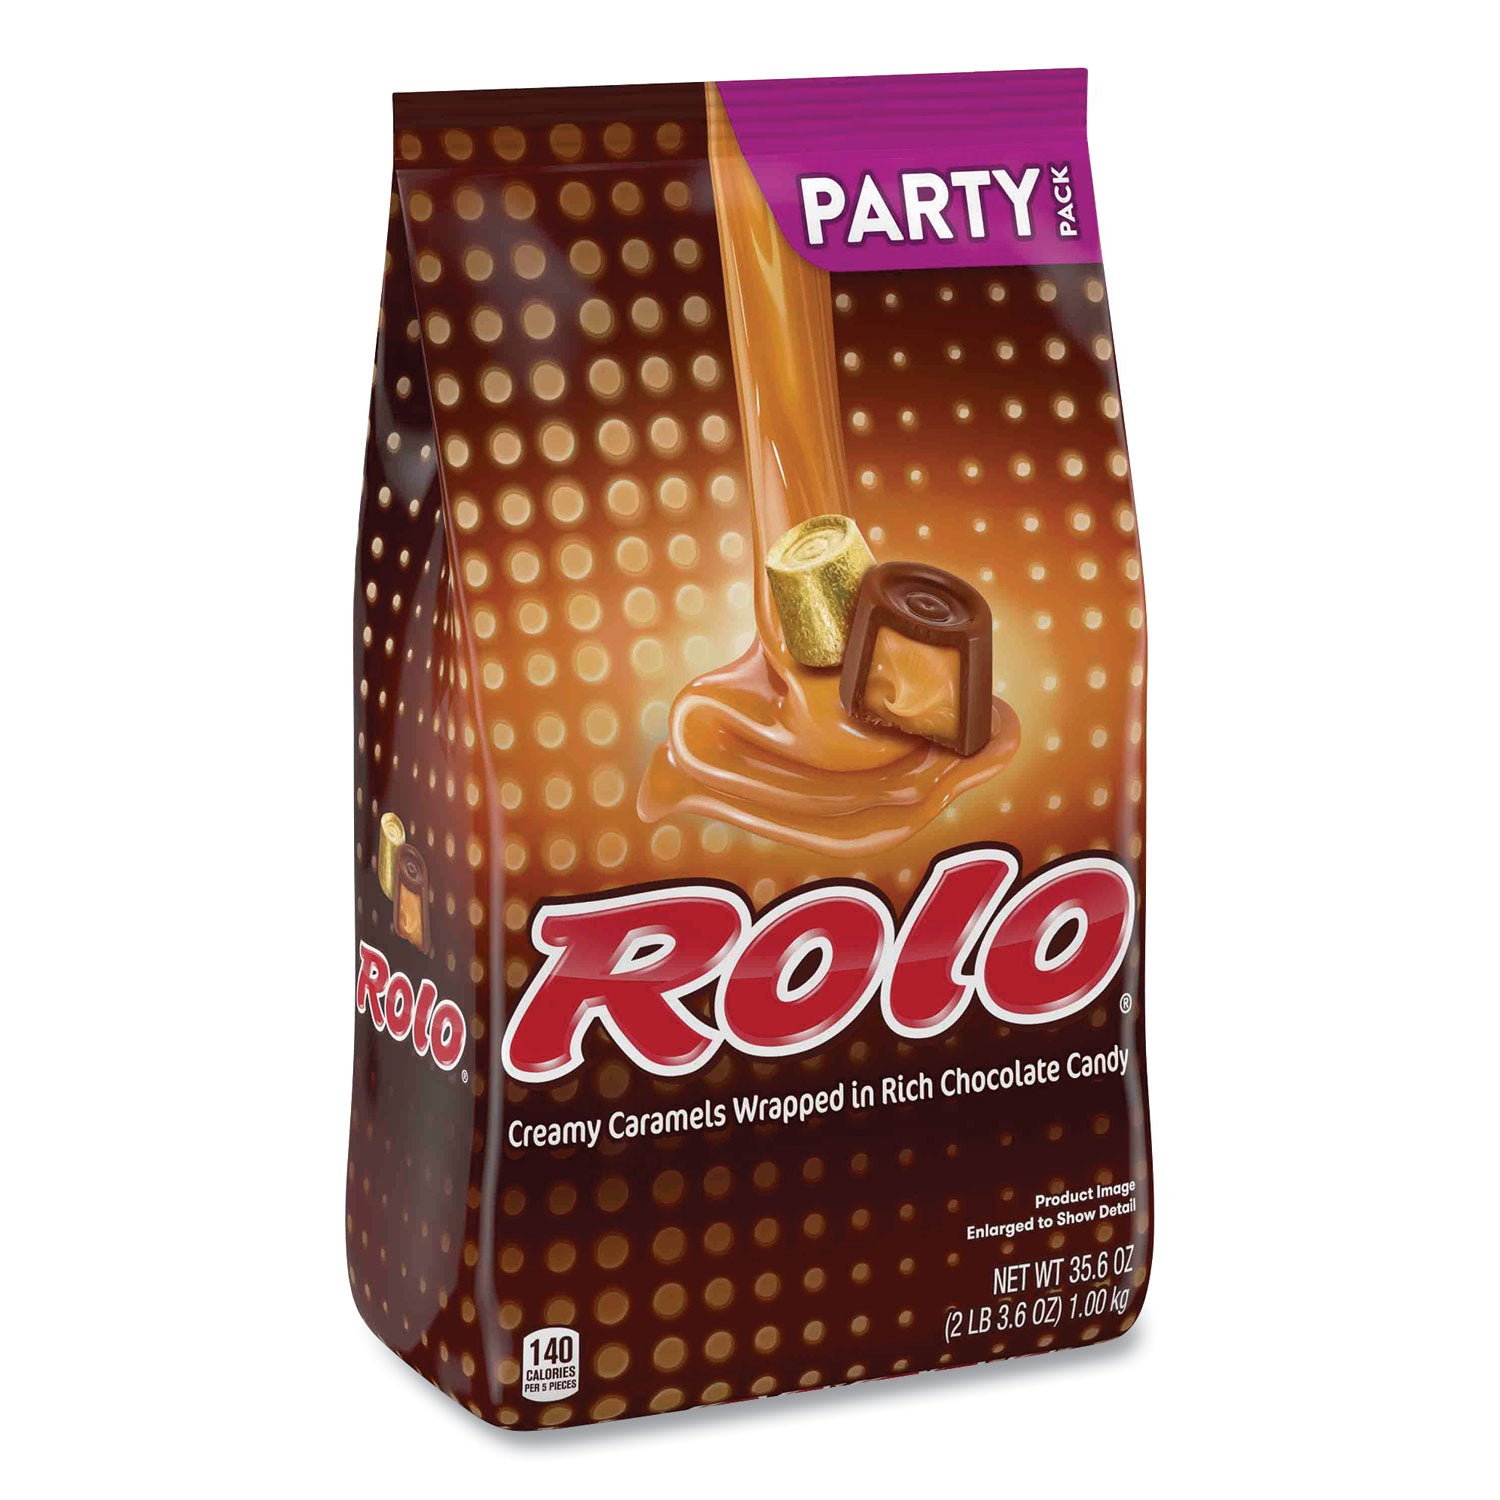 party-pack-creamy-caramels-wrapped-in-rich-chocolate-candy-356-oz-bag-ships-in-1-3-business-days_grr24600406 - 1